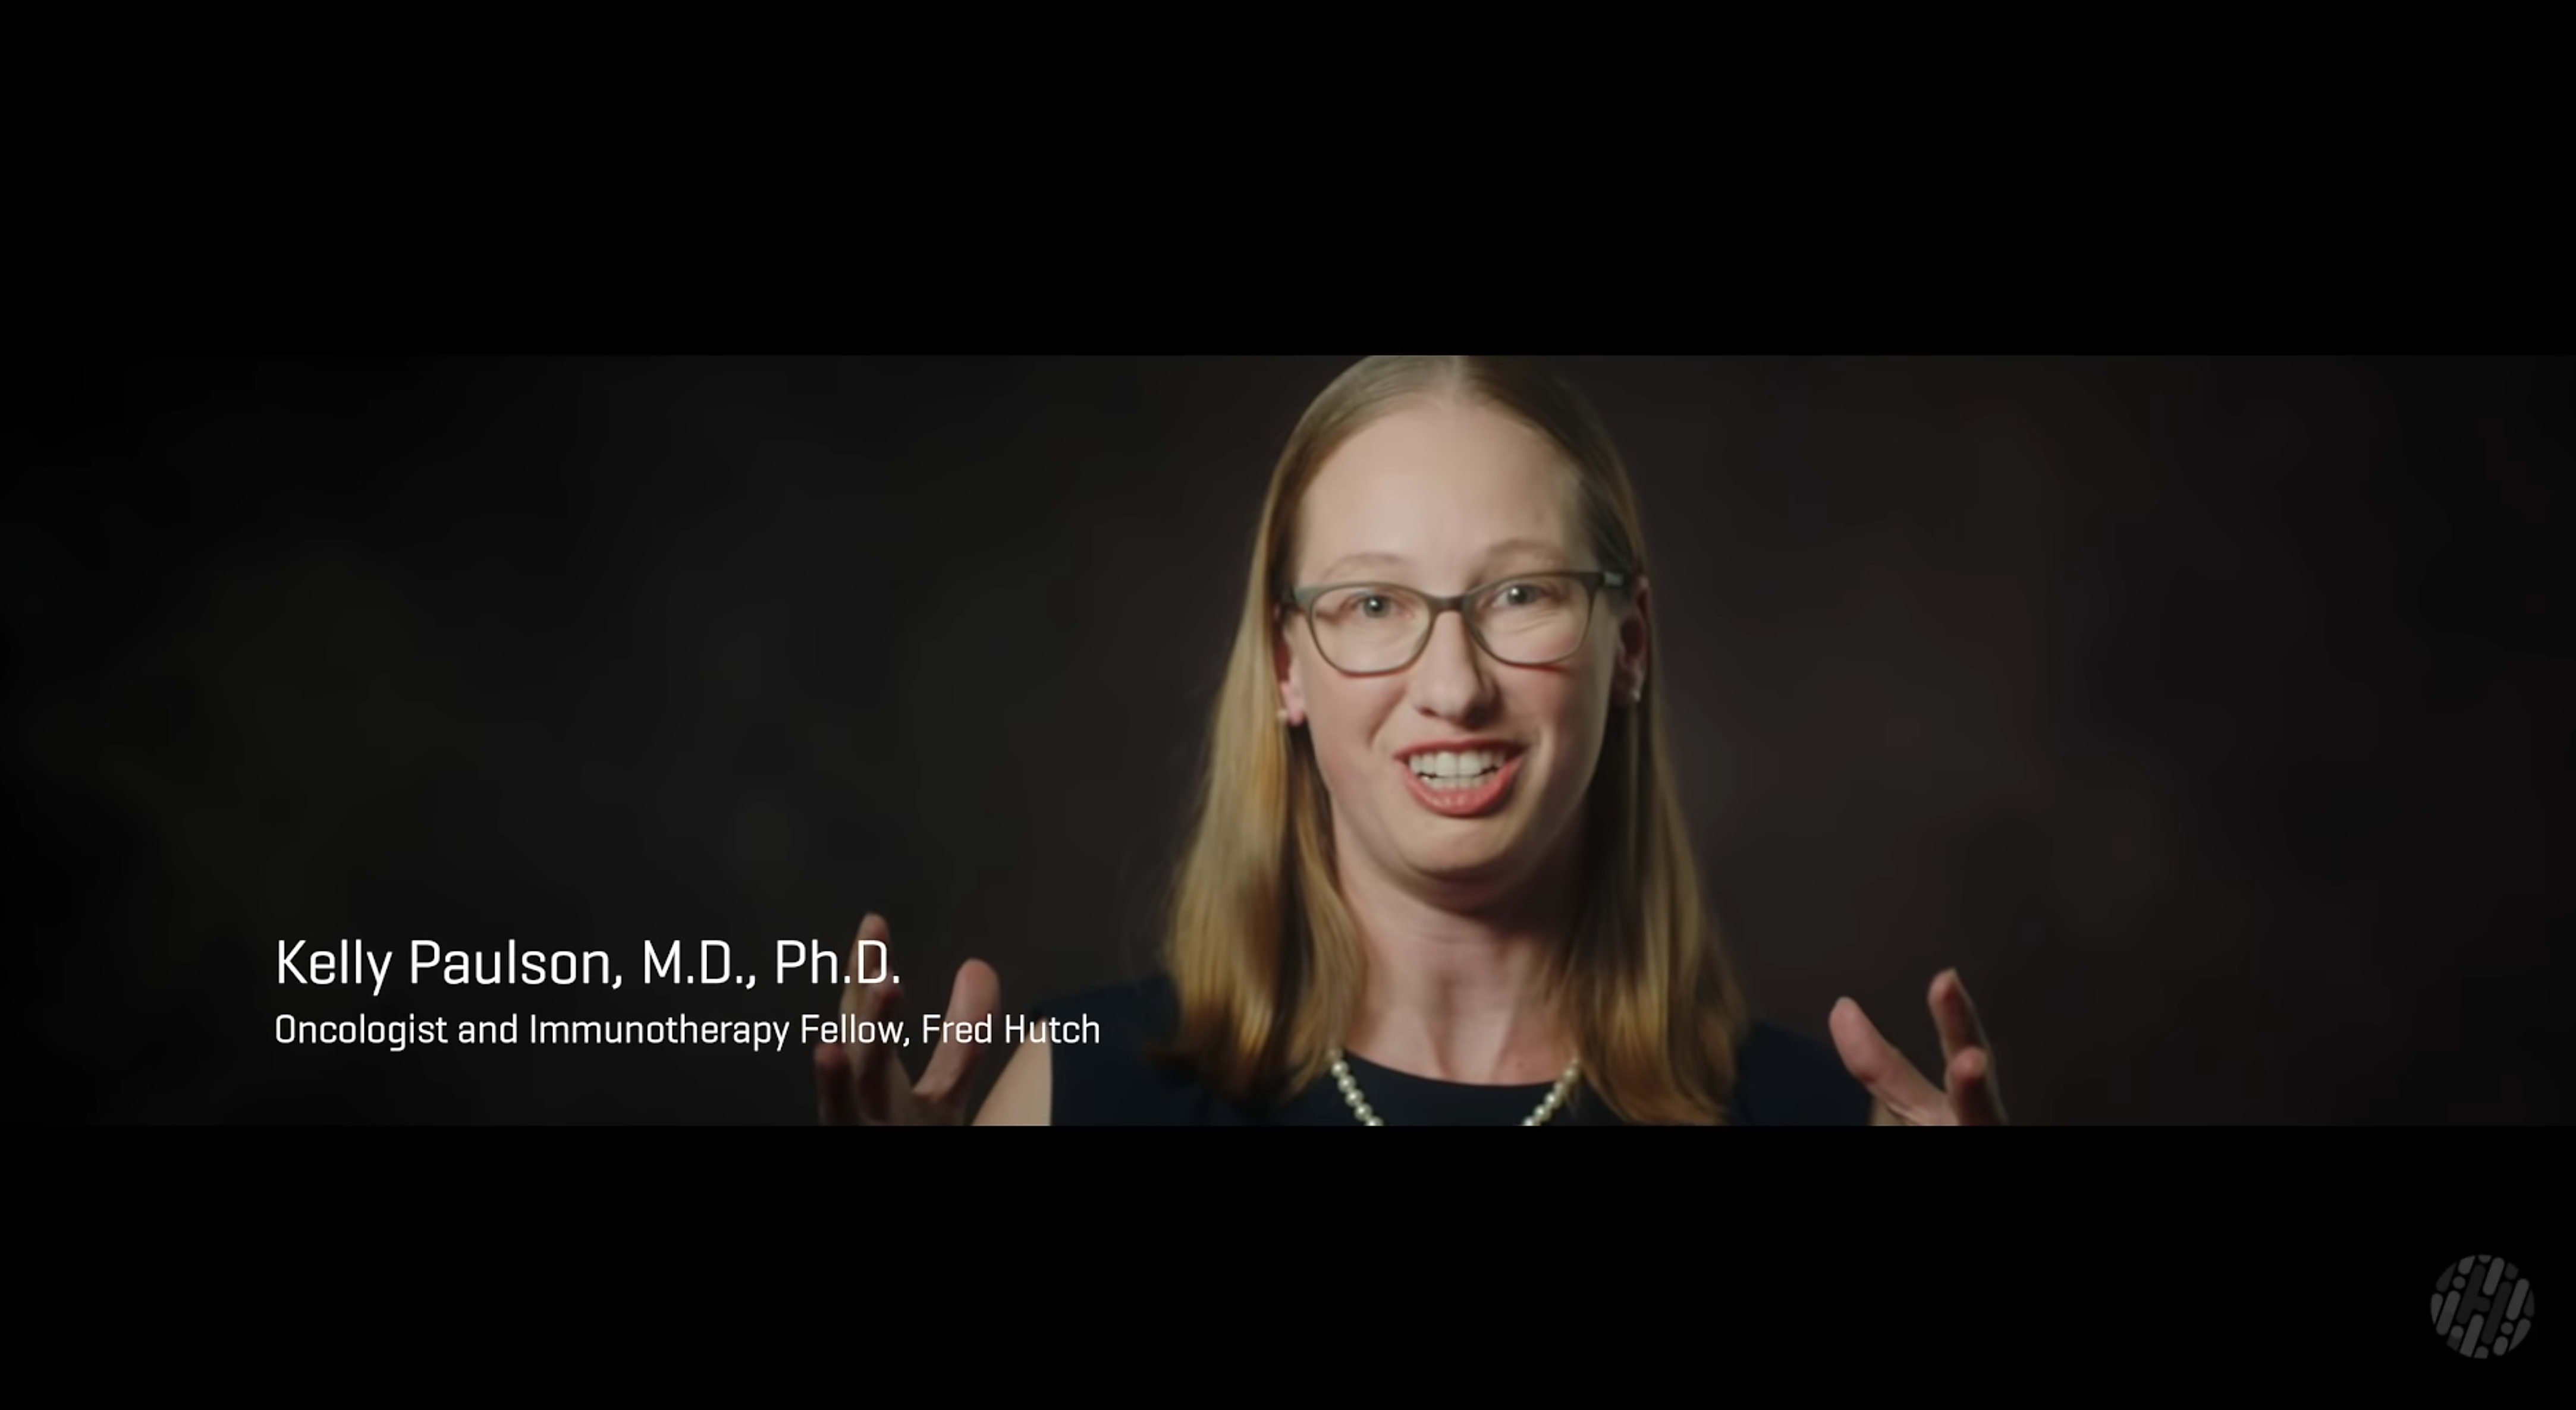 Video featuring Kelly Paulson, MD, PhD, Oncologist and Immunotherapy Fellow at the Fred Hutchinson Cancer Research Center